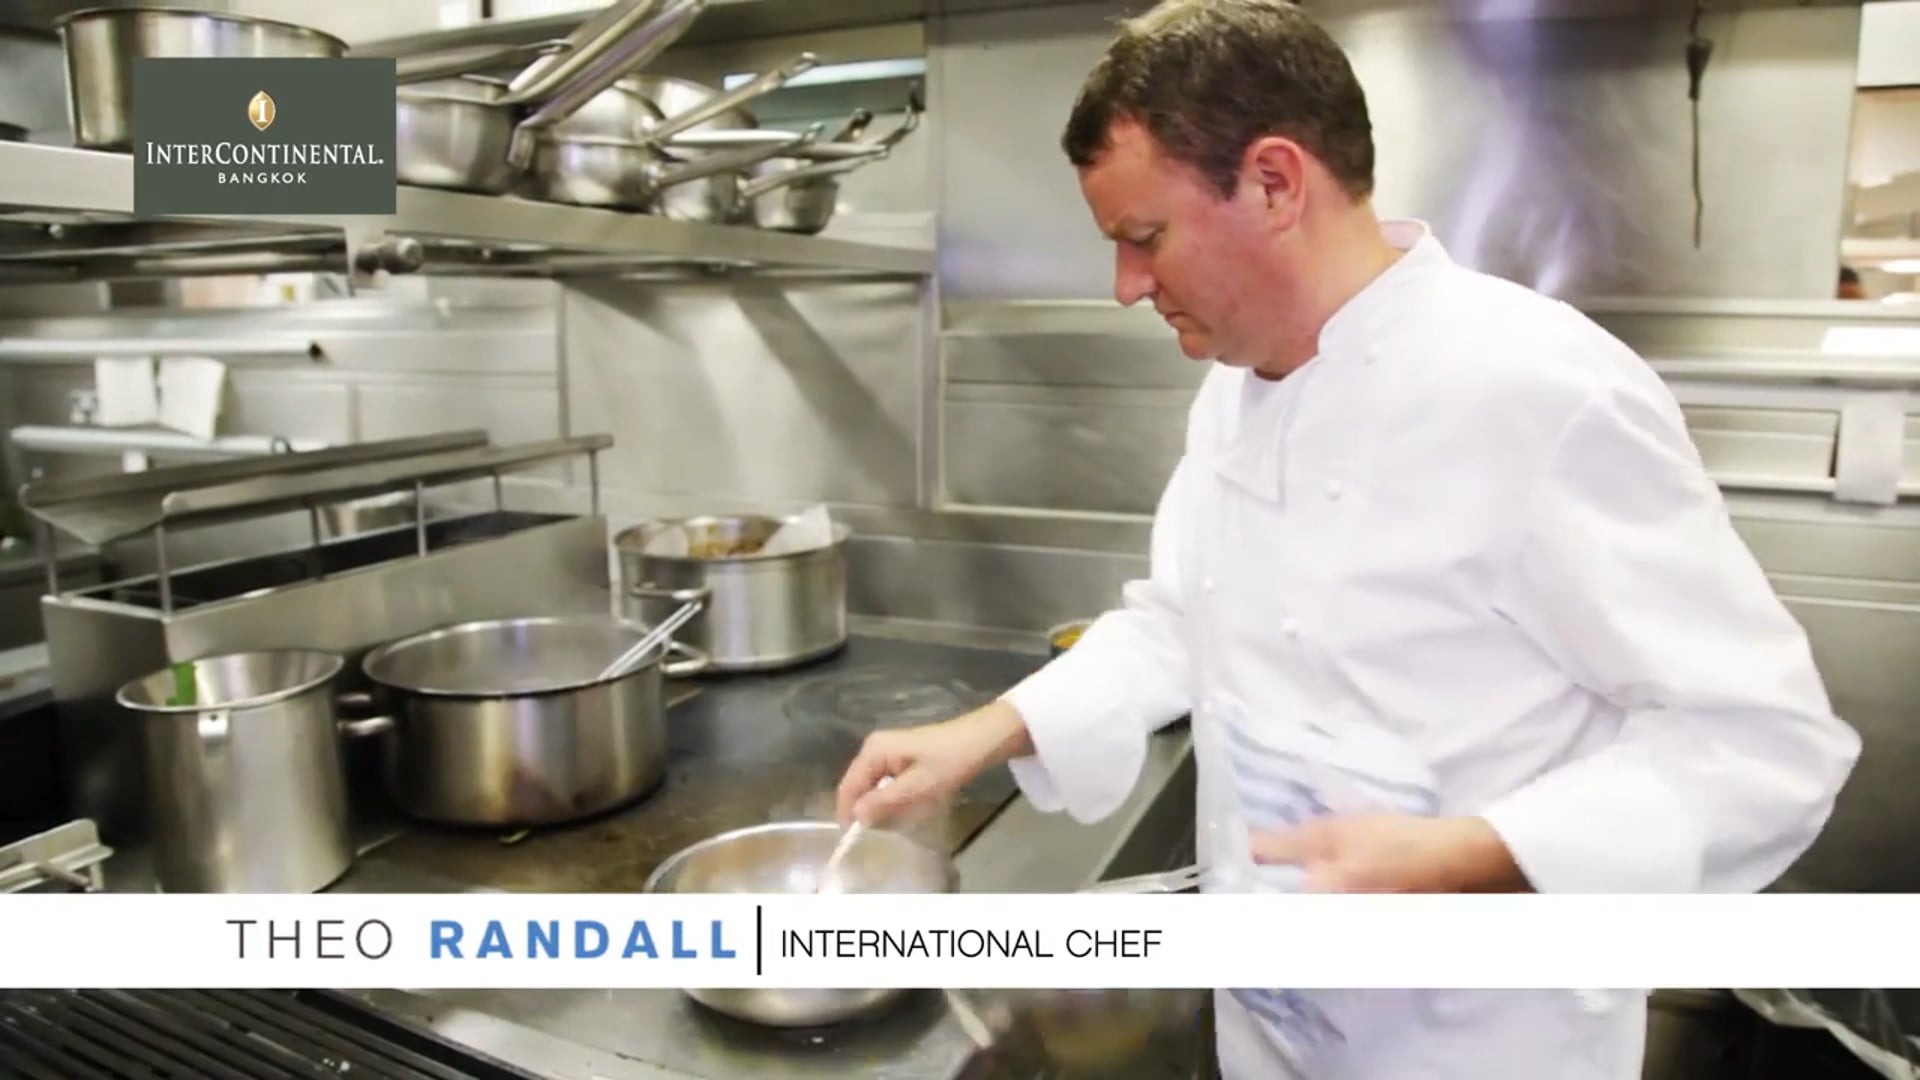 Promotional Video for Hotel Brand and Restaurant